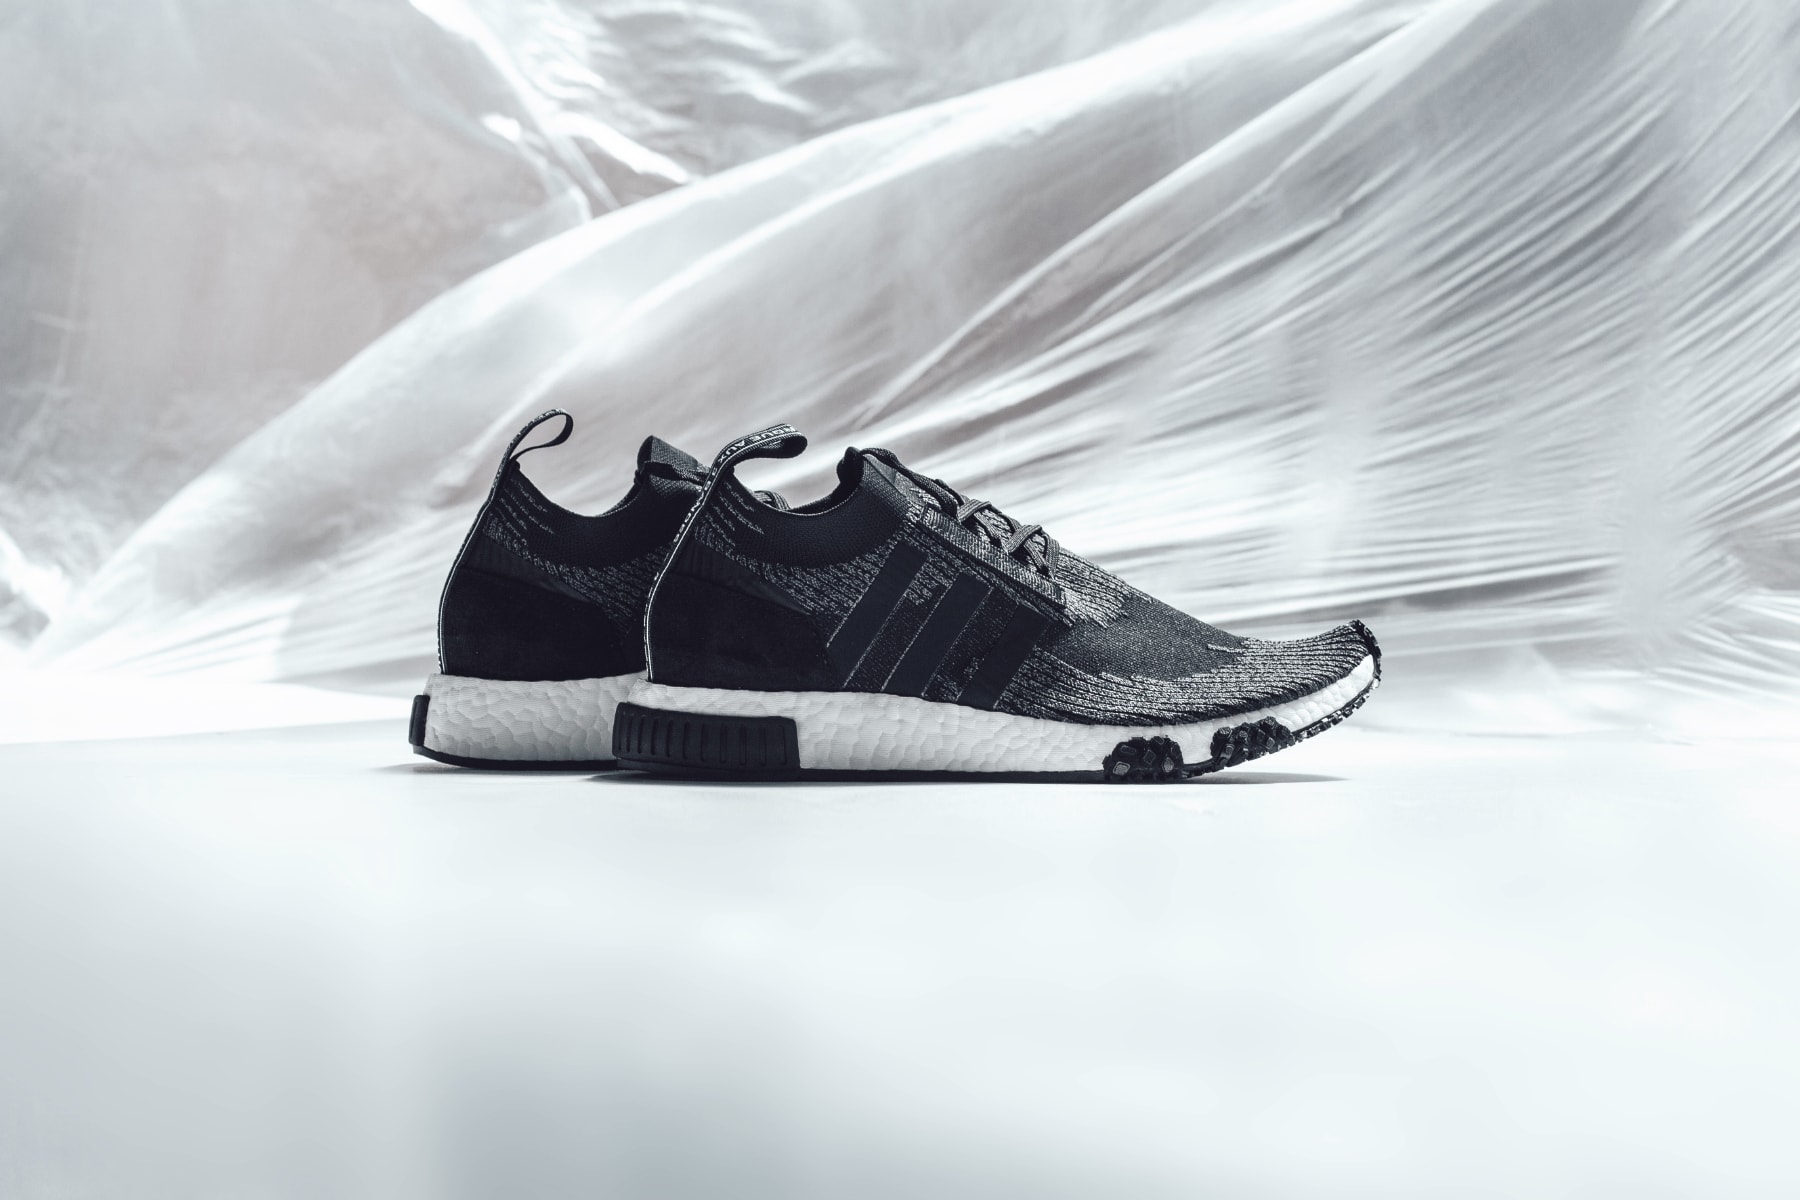 adidas NMD Racer "Monochrome" Collection Black White Sneaker